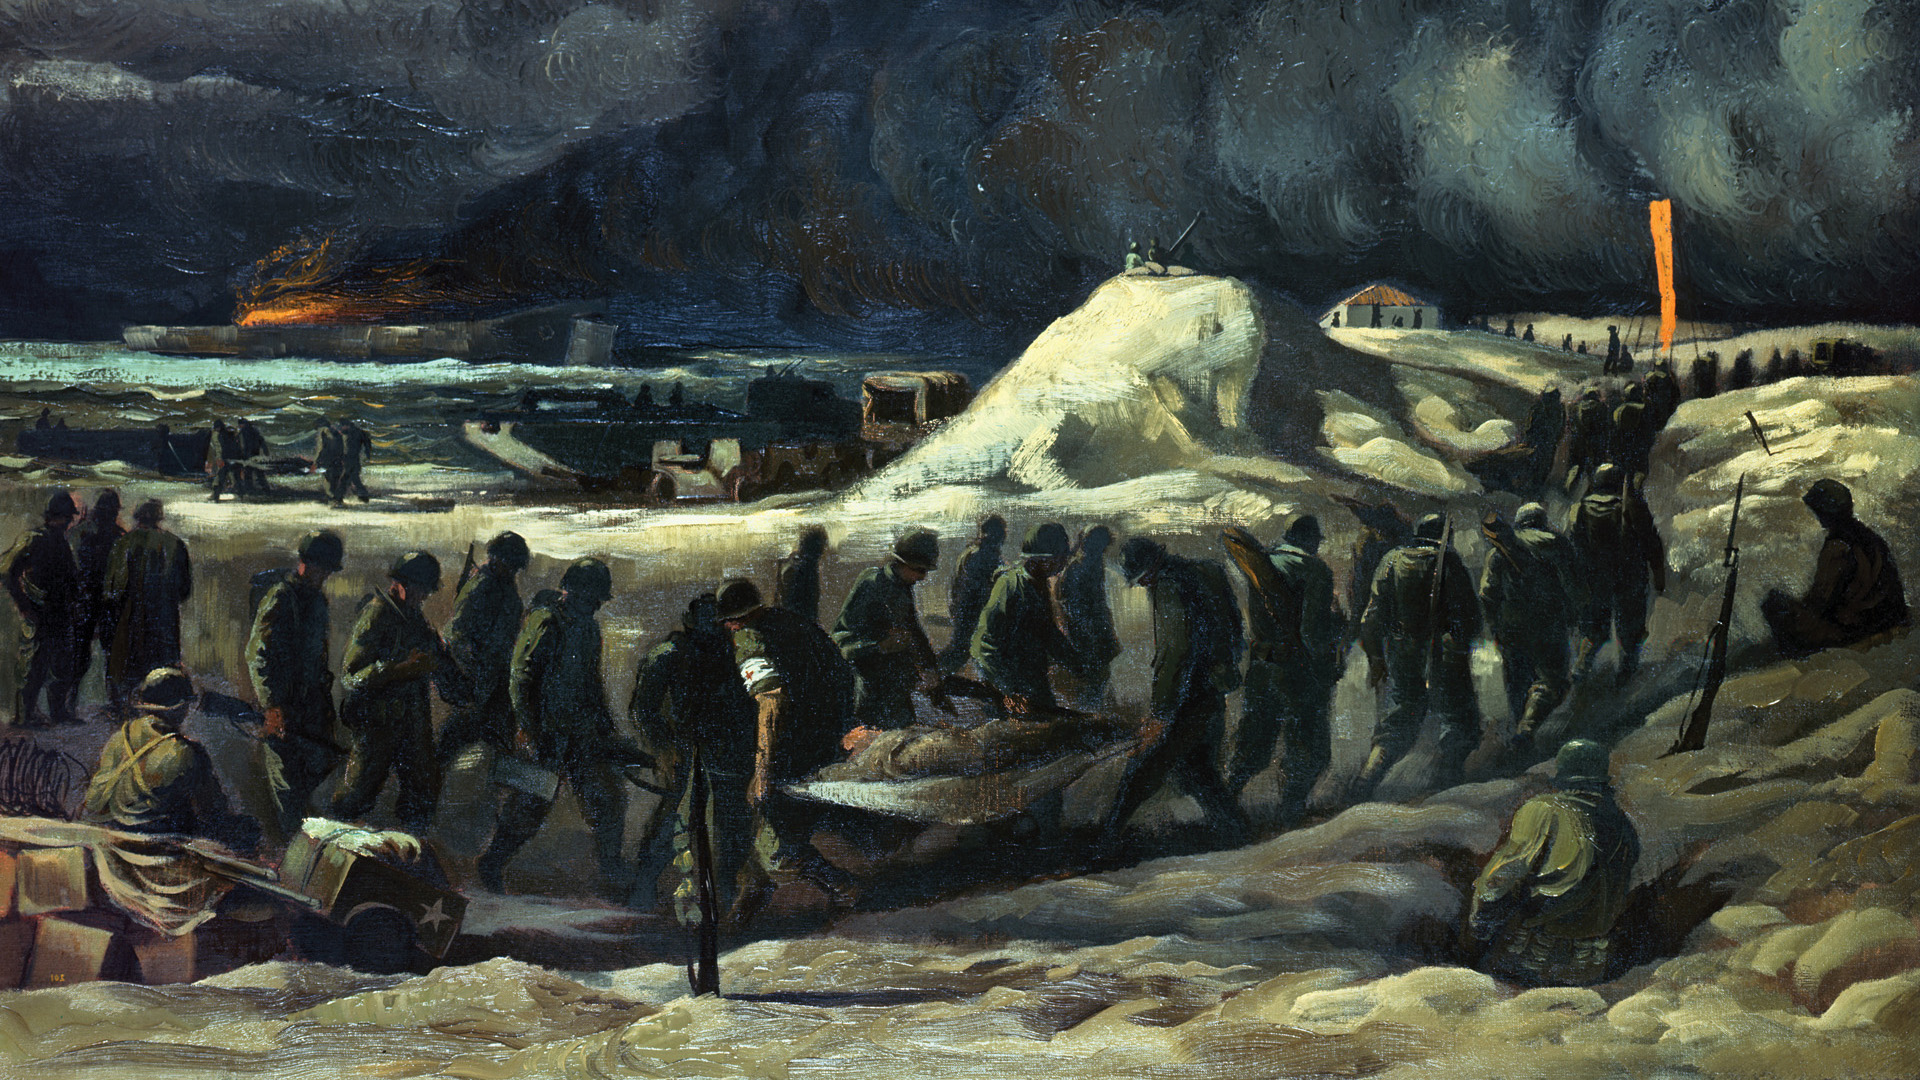 Members of the U.S. 1st Infantry Division march ashore at Gela, Sicily, while an LST burns off shore on the first day of Operation Husky in this 1943 painting by Navy war artist Mitchell Jamieson. Soldiers injured during the fighting can be seen being evacuated to hospital ships. Sicily became the stepping stone for the invasion of the Italian mainland.